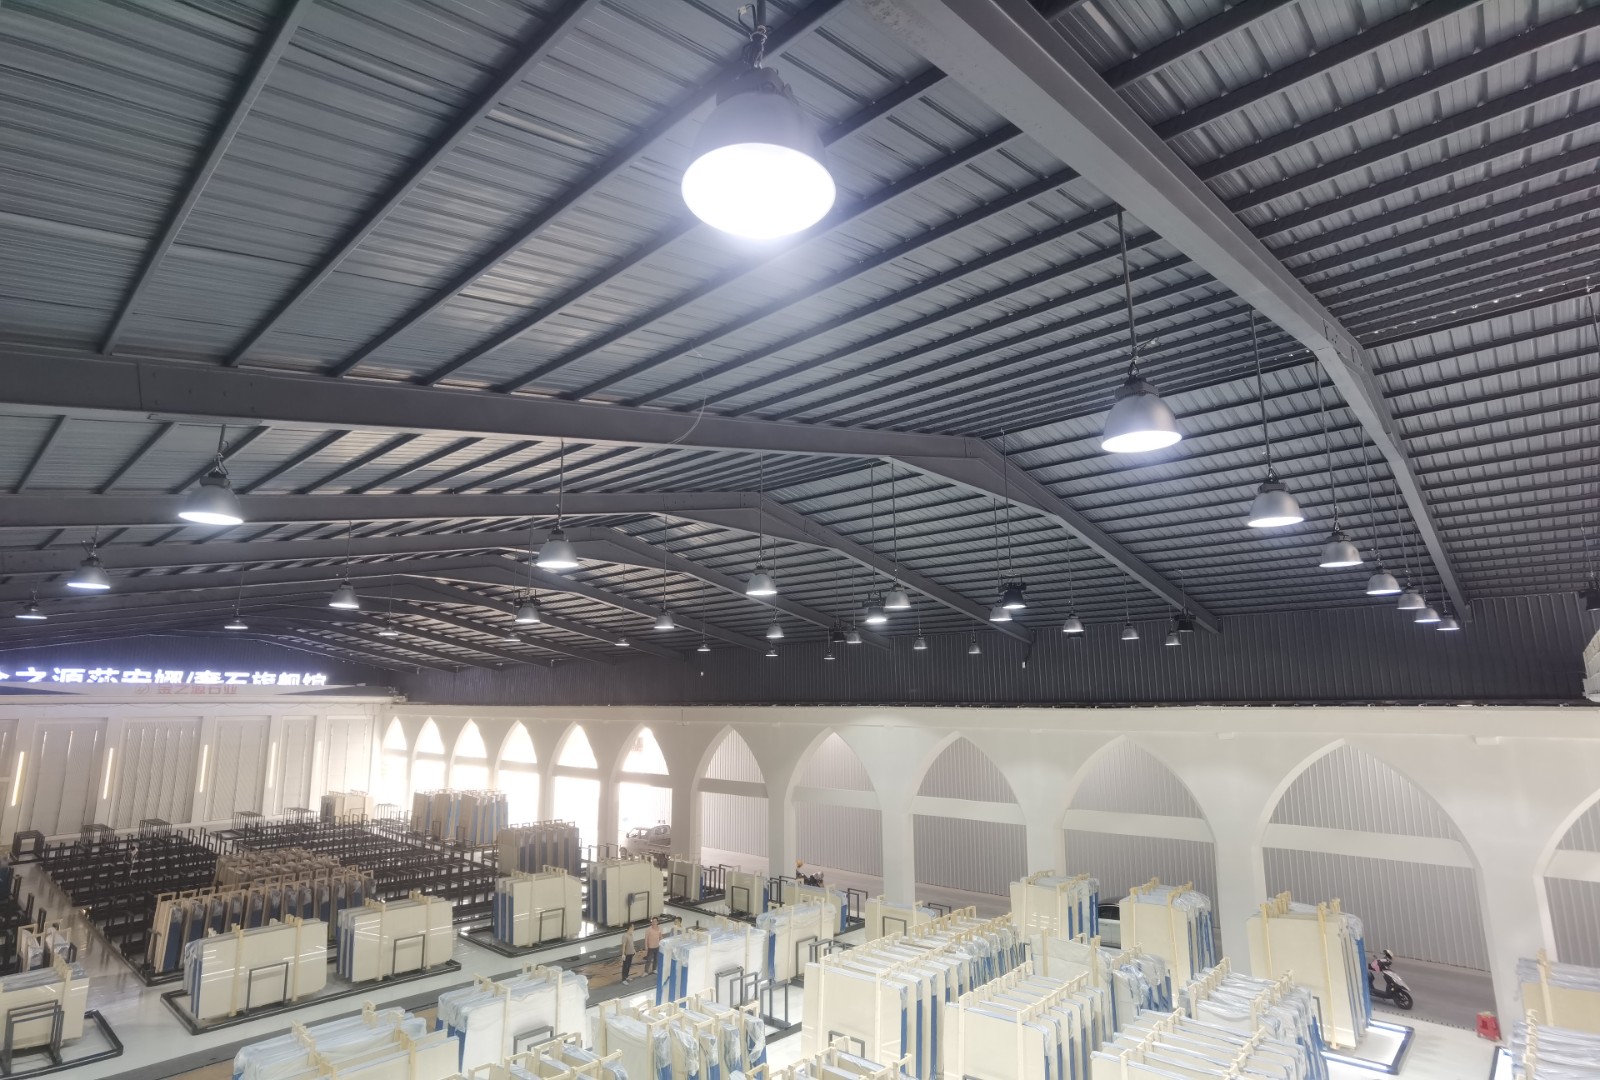 COB Lighting - The Pinnacle Choice for Precision Stone Illumination with Smart Systems